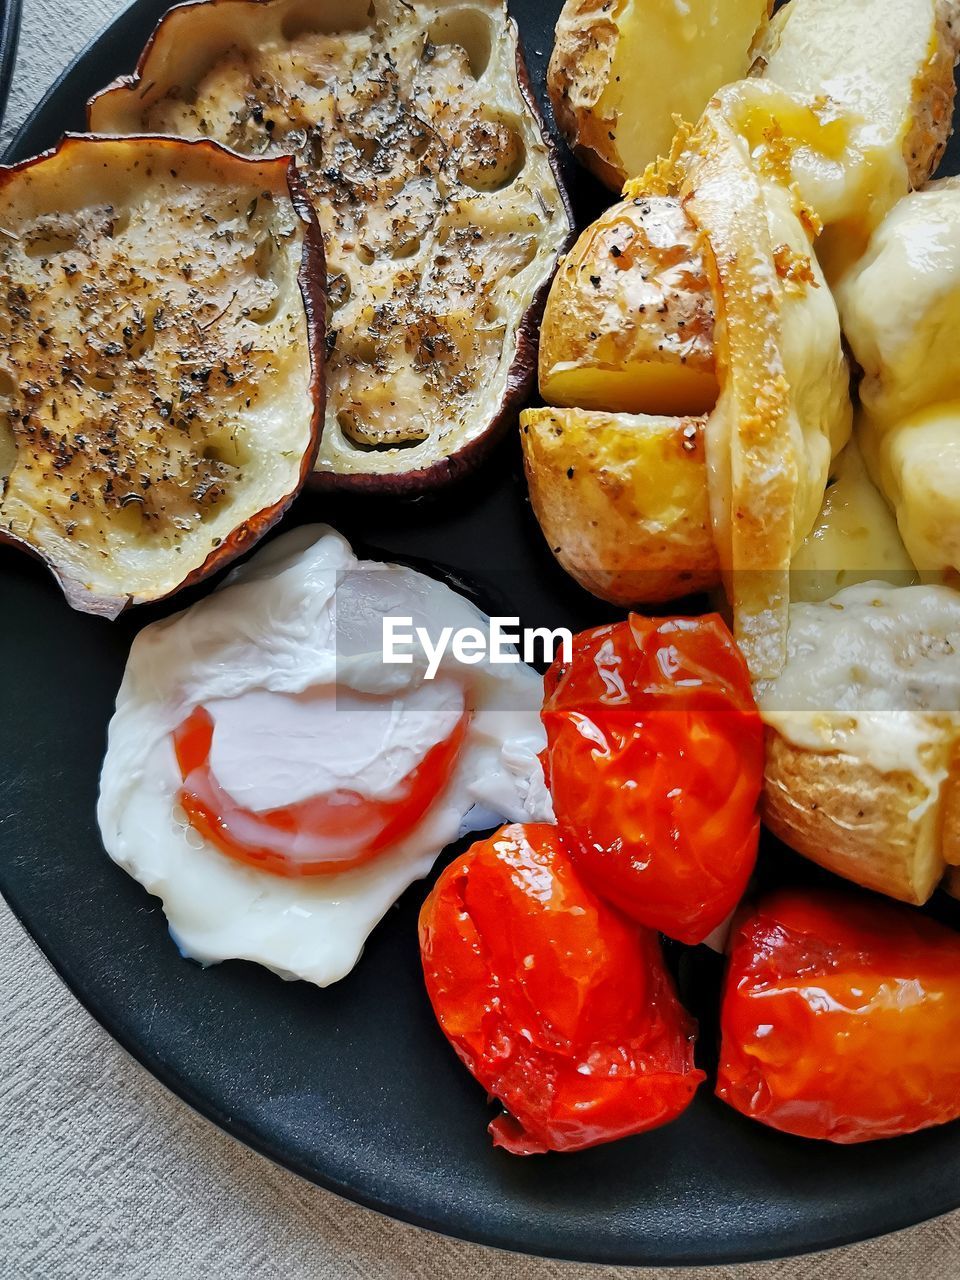 food, food and drink, dish, freshness, meal, breakfast, fast food, healthy eating, cuisine, no people, still life, indoors, produce, high angle view, wellbeing, plate, fruit, baked, vegetable, close-up, tomato, table